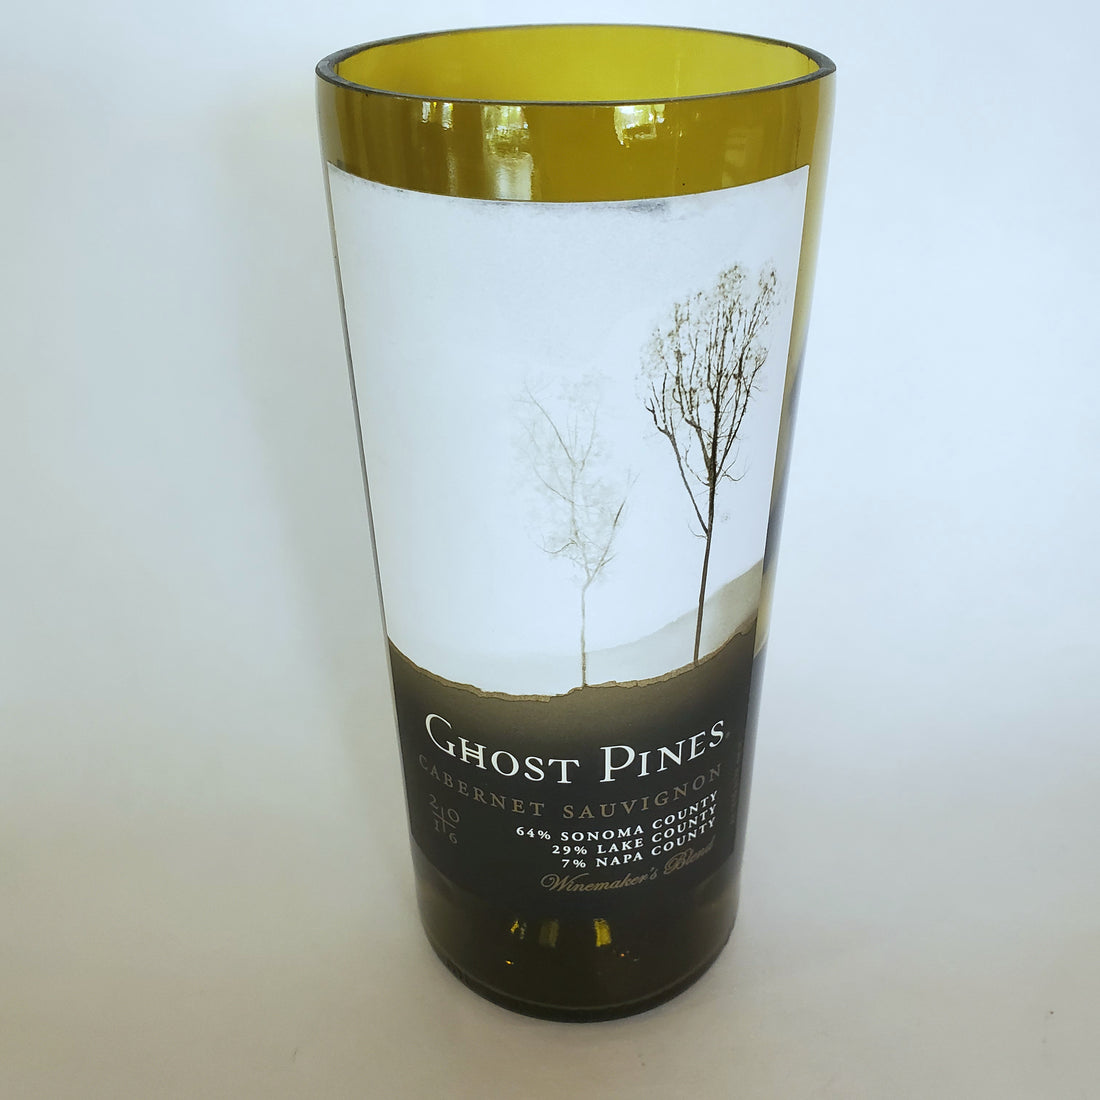 Ghost Pines Cabernet Sauvignon 2016 Hand Cut Upcycled Wine Bottle Candle - Choose Your Scent